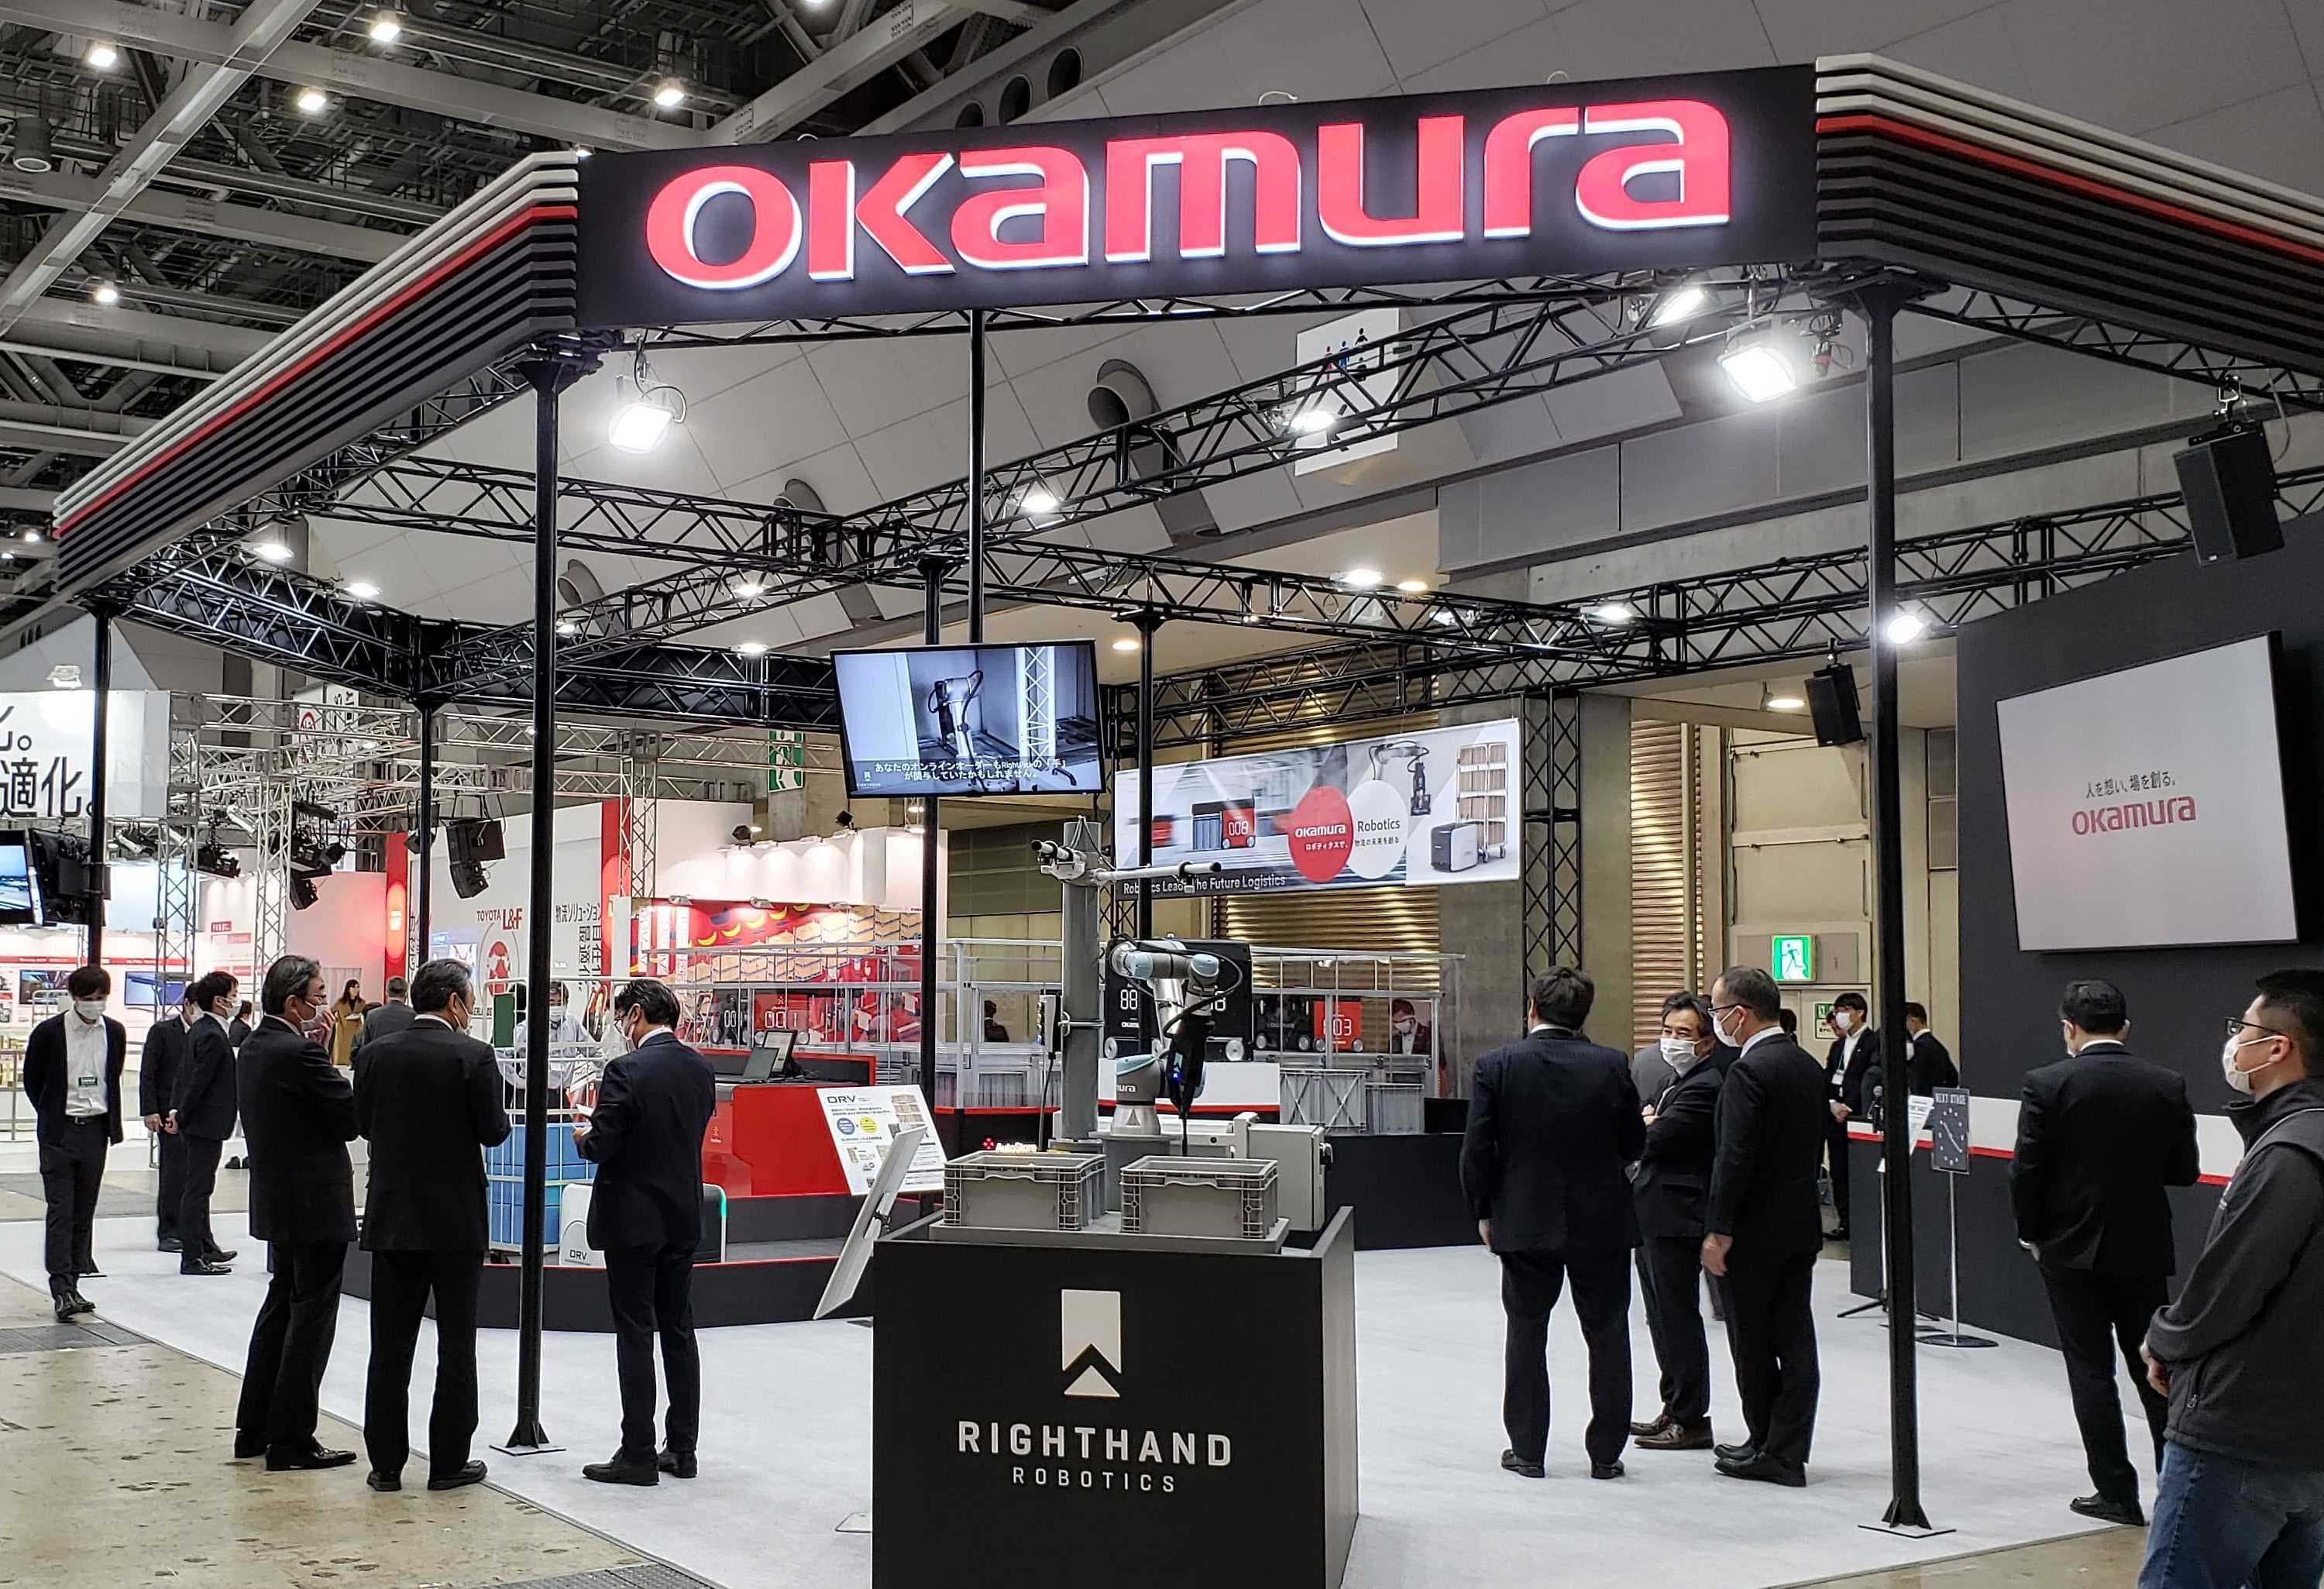 The Latest Article: Okamura partners with righthand robotics